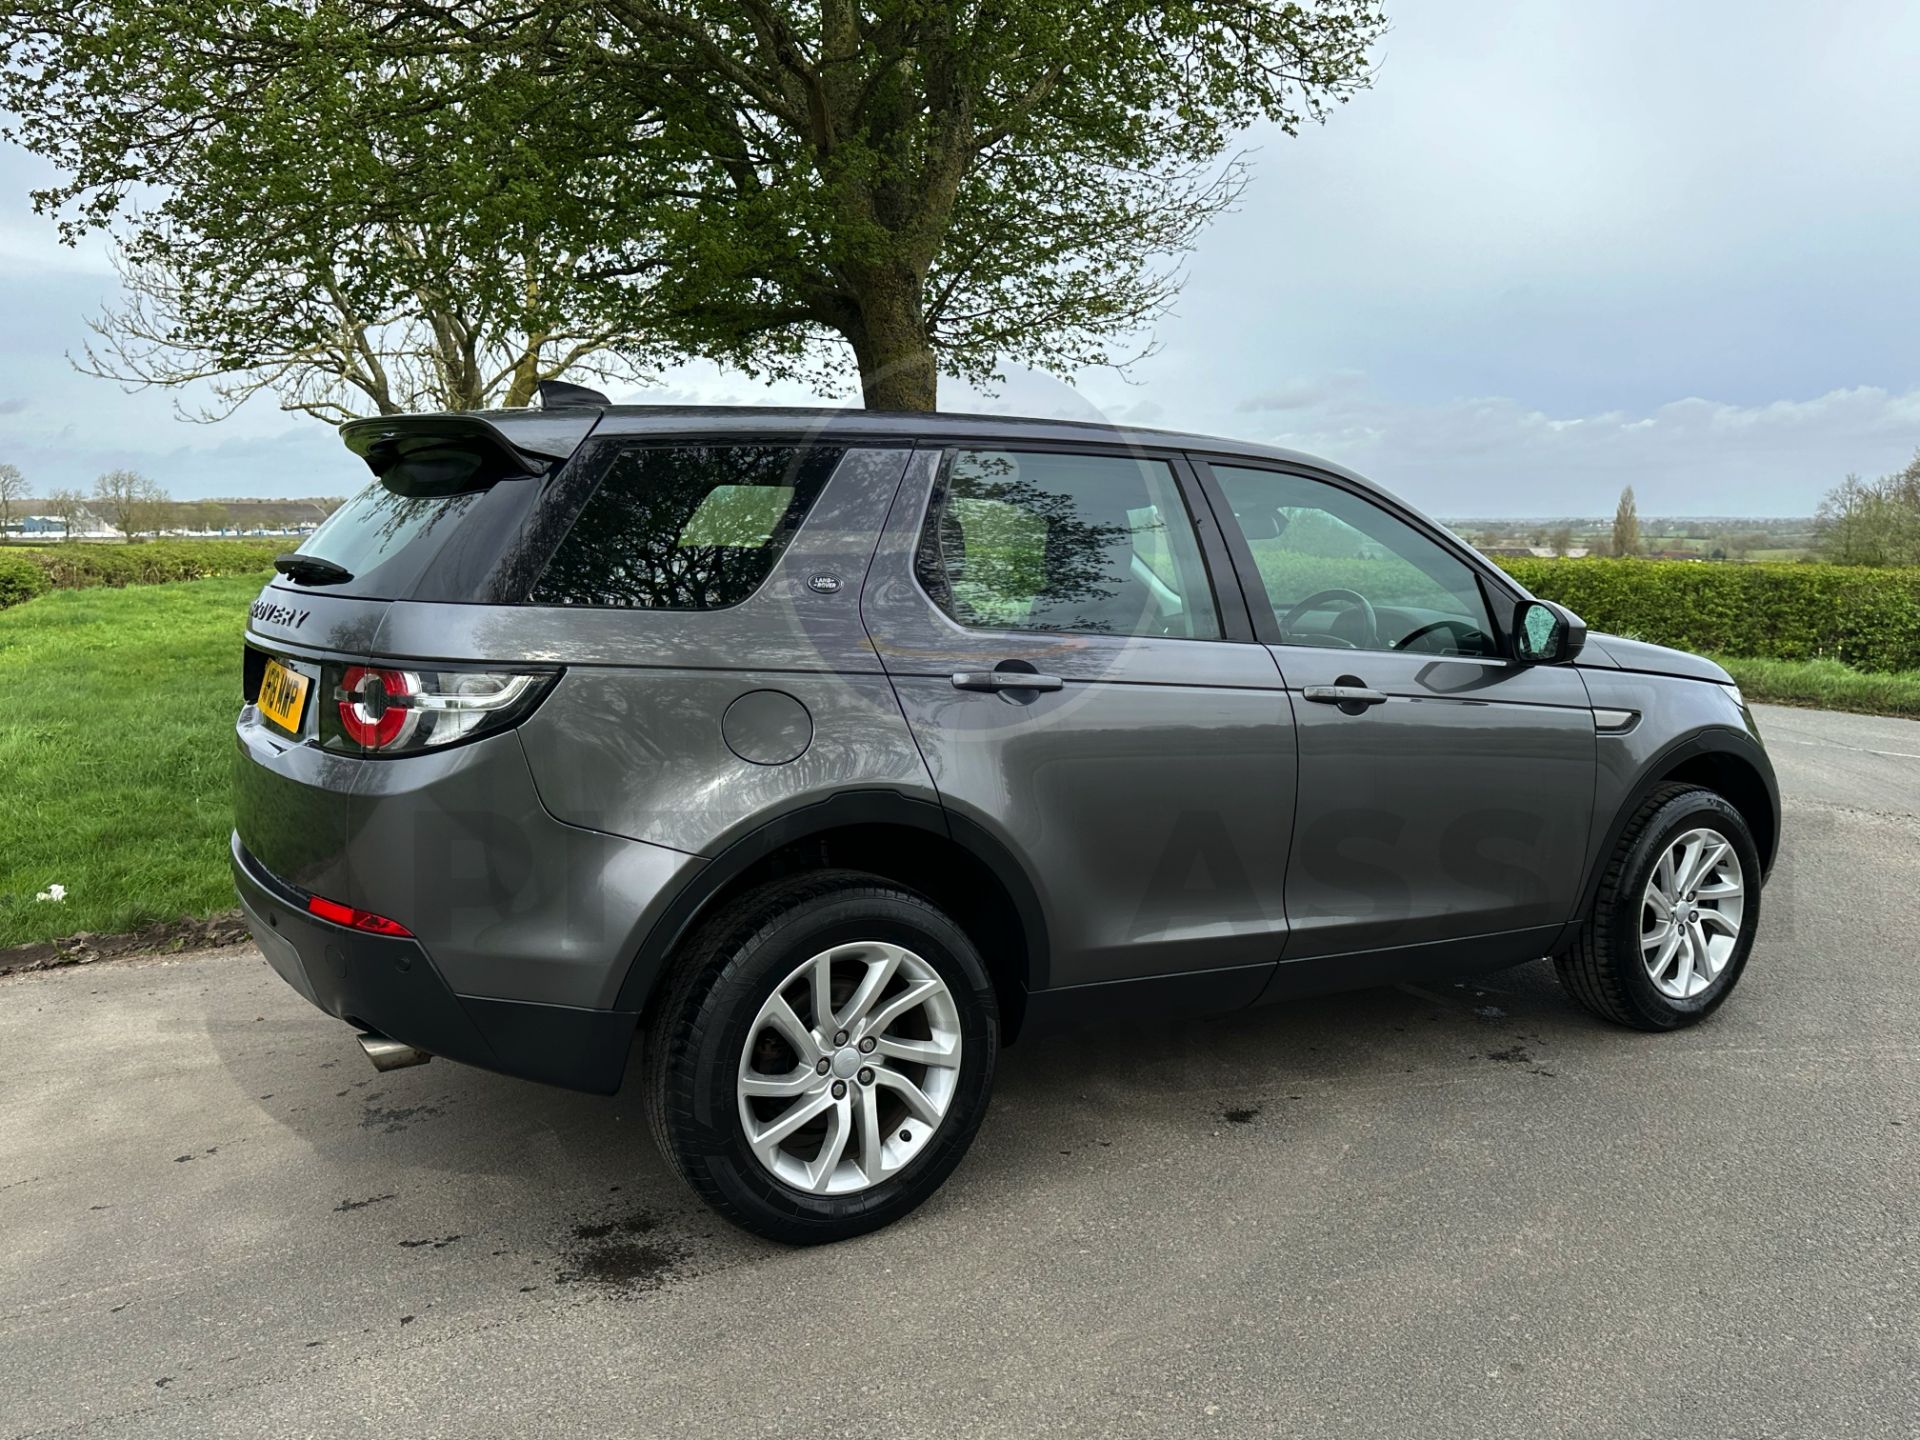 (On Sale) LAND ROVER DISCOVERY SPORT *SE TECH* 5 DOOR SUV (2018 - EURO 6) 2.0 TD4 - AUTO *HUGE SPEC* - Image 13 of 51